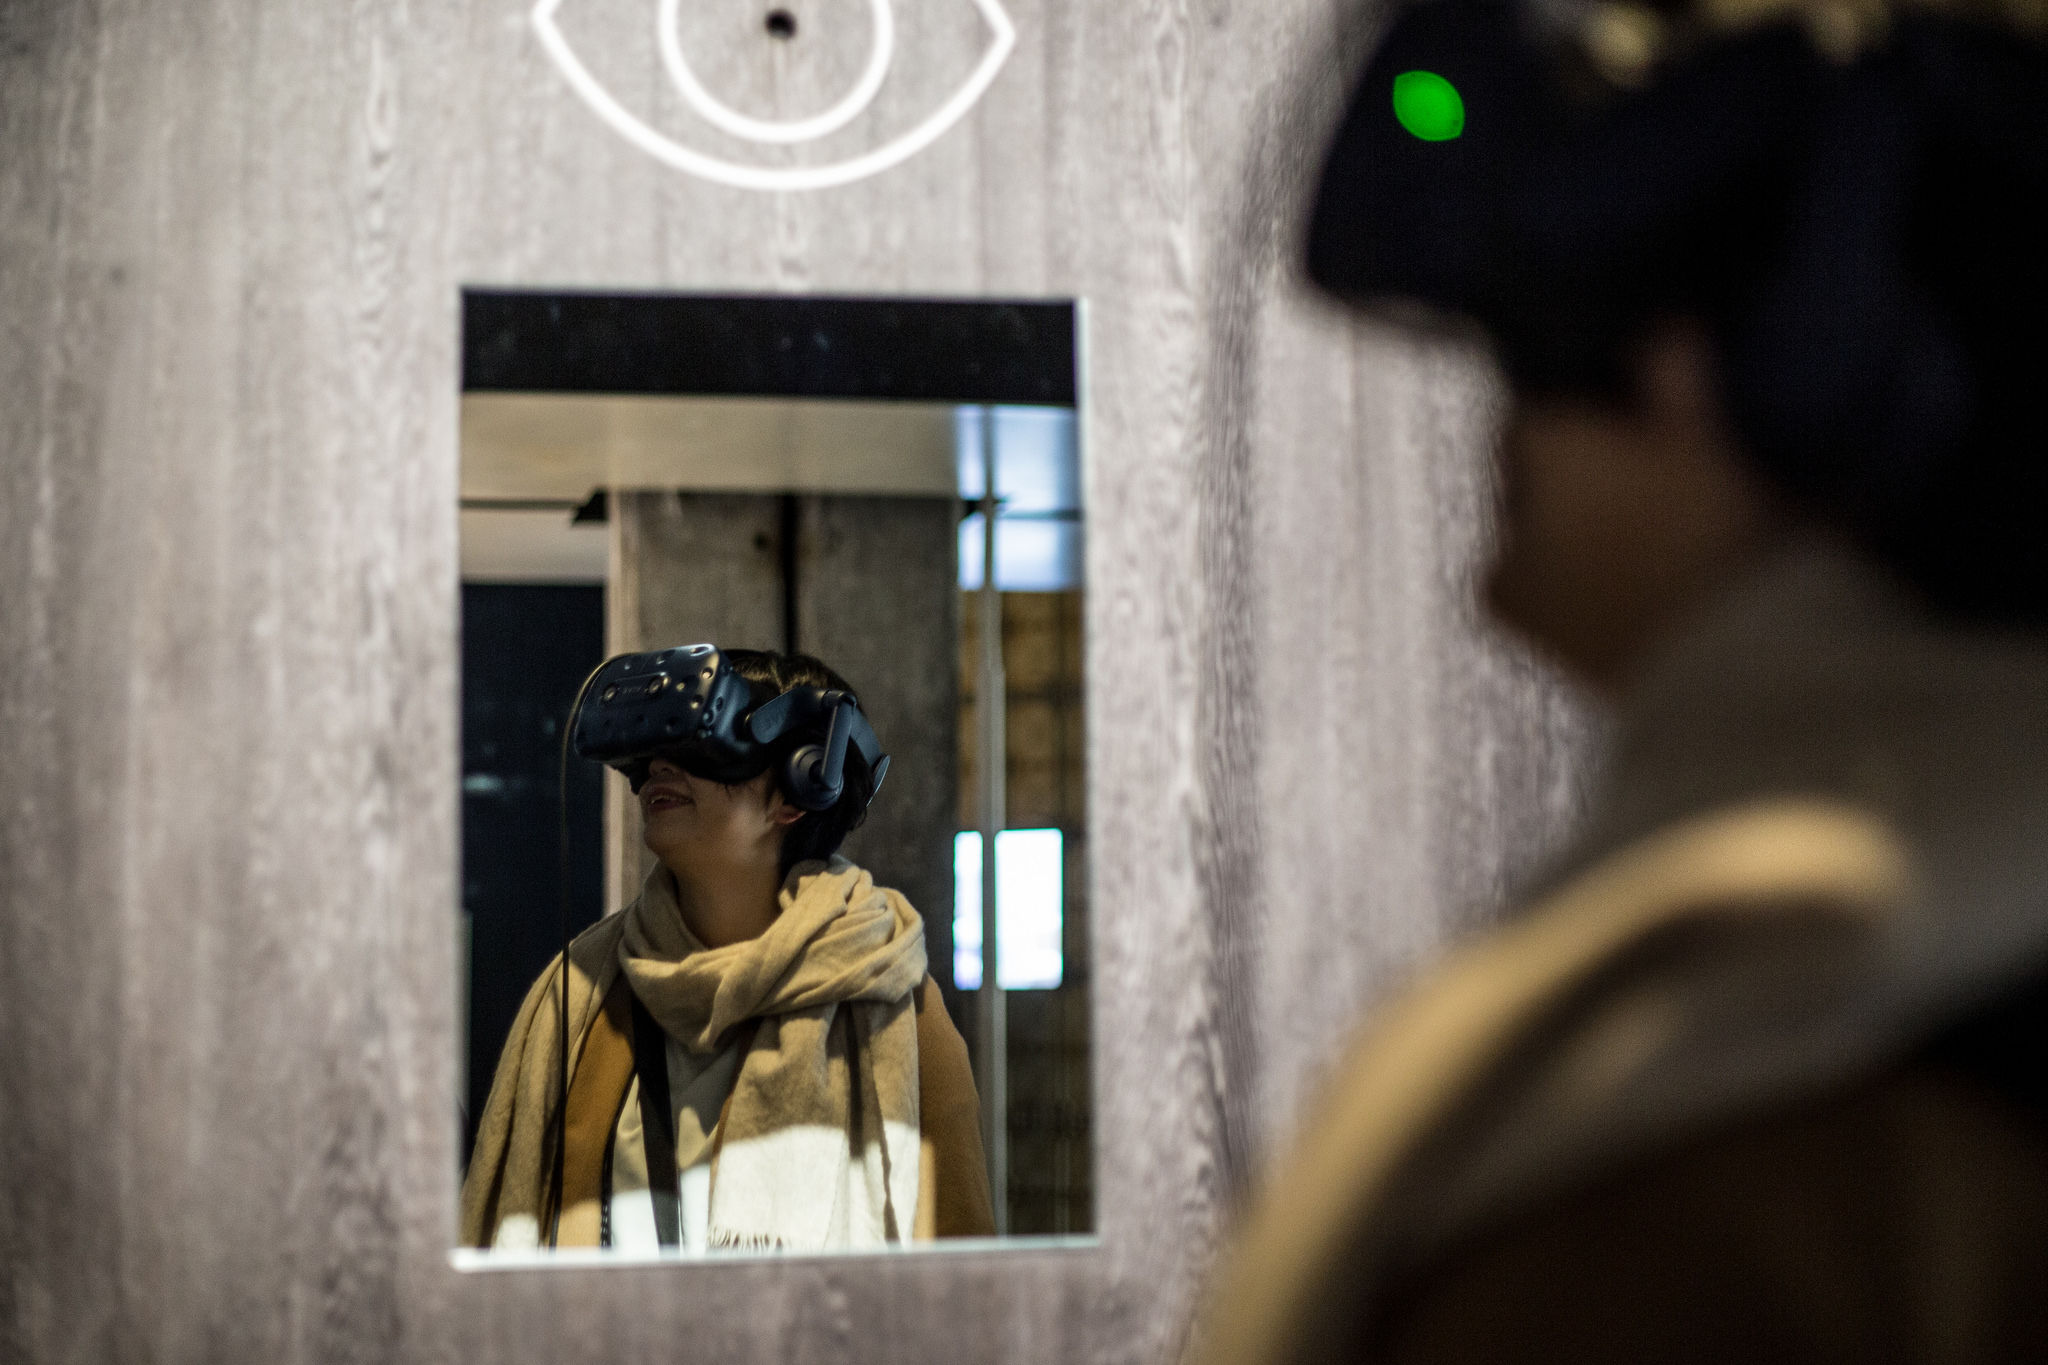 Hyundai Motor and Ars Electronica Open Global Exhibition Exploring ‘Future Humanity – Our Shared Planet’ 